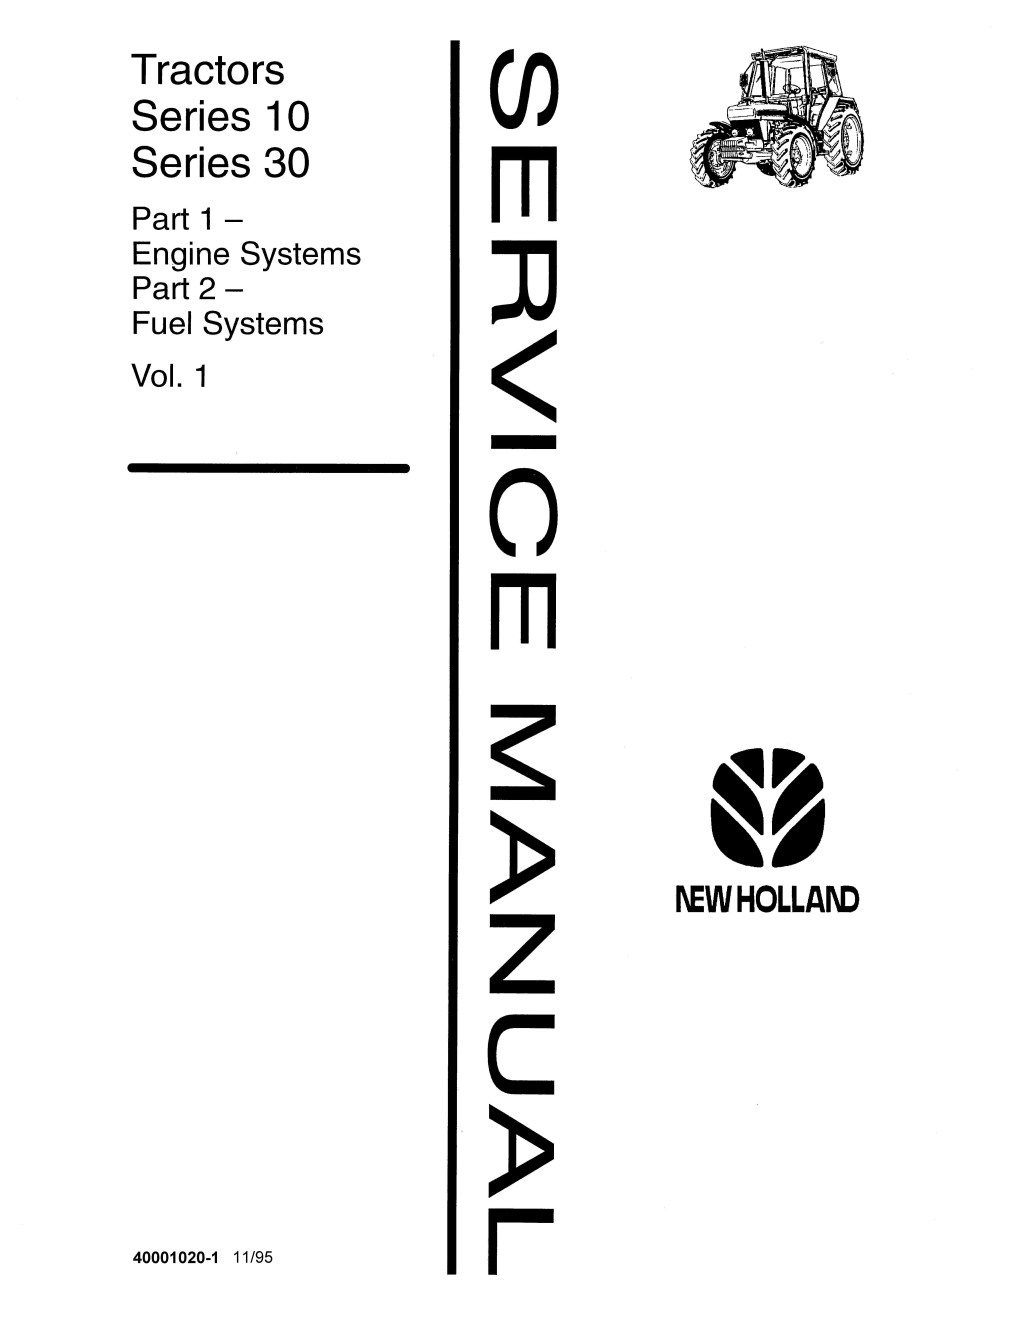 Picture of: Ford New Holland  Tractor Service Repair Manual by